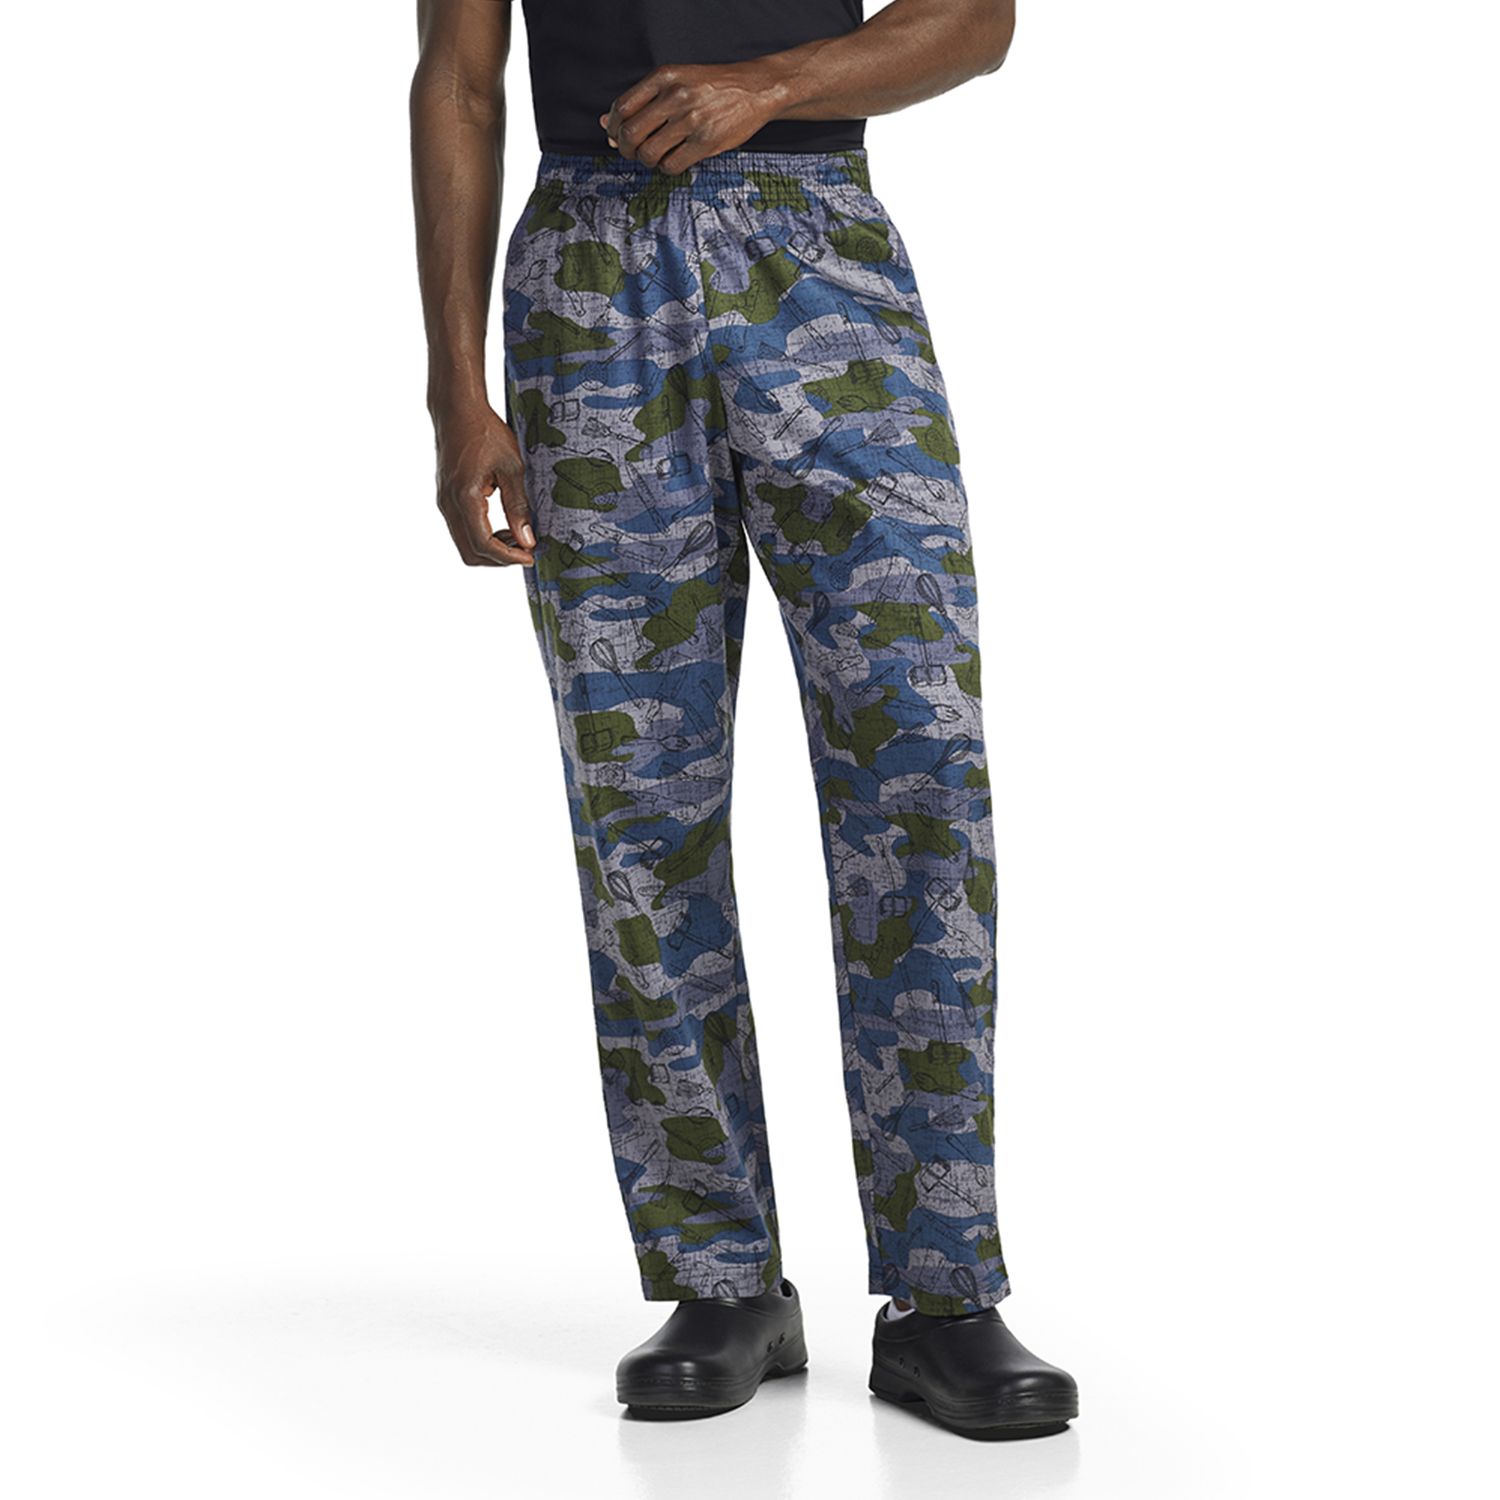 CW3500-CW265_M_Male_0294 100&#37; Cotton Printed Chef Pants, Classic Style Print Designs